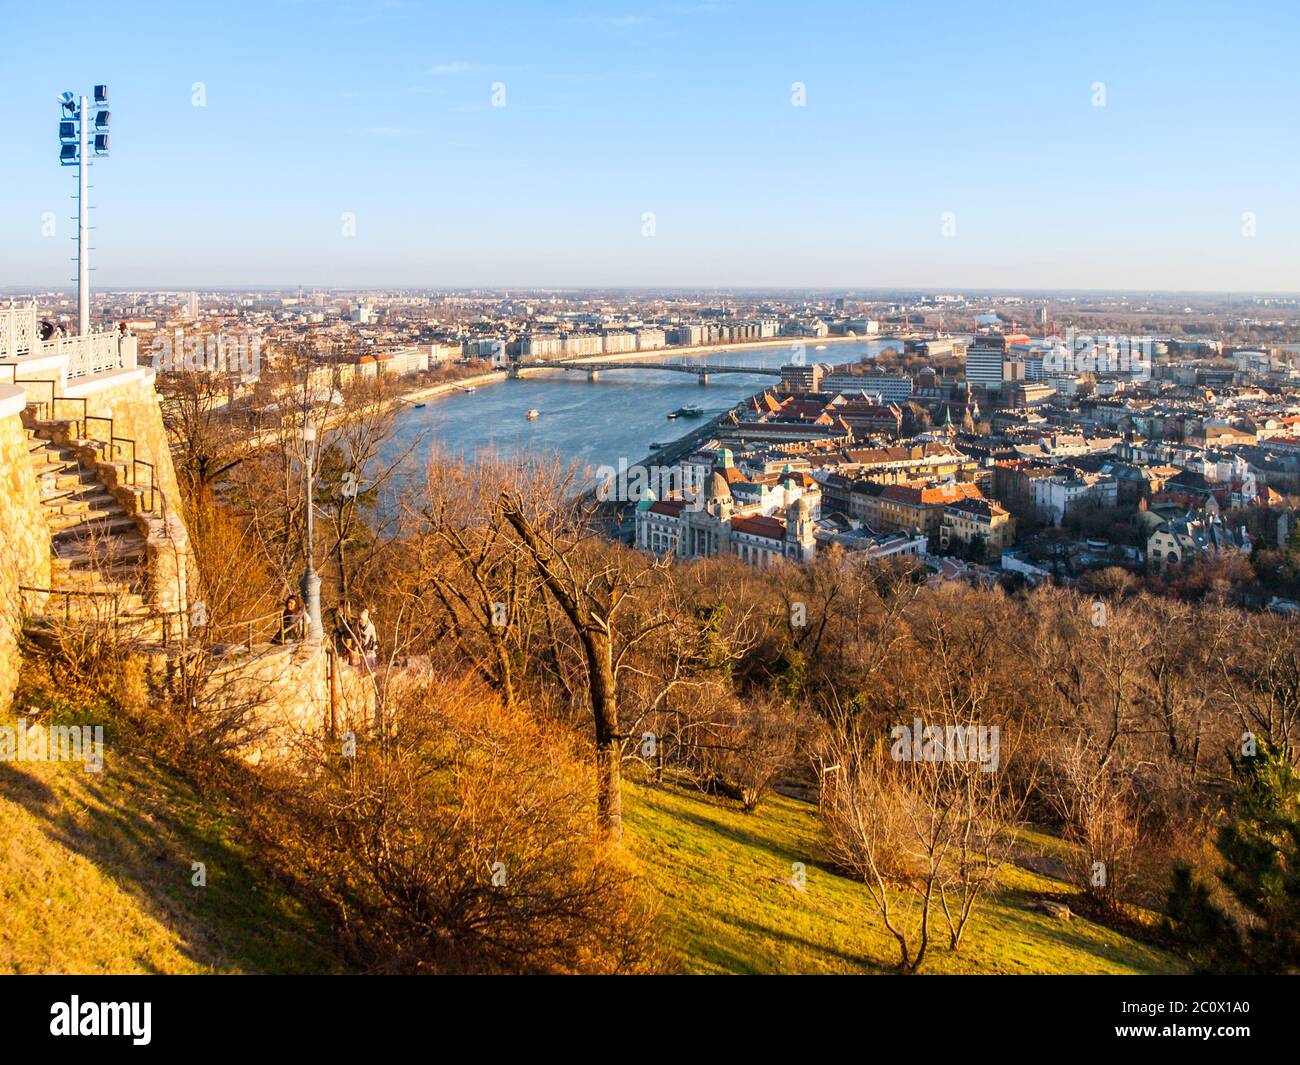 Budapest cityscape with Danube river. View from Gellert Hill, Hungary. Stock Photo